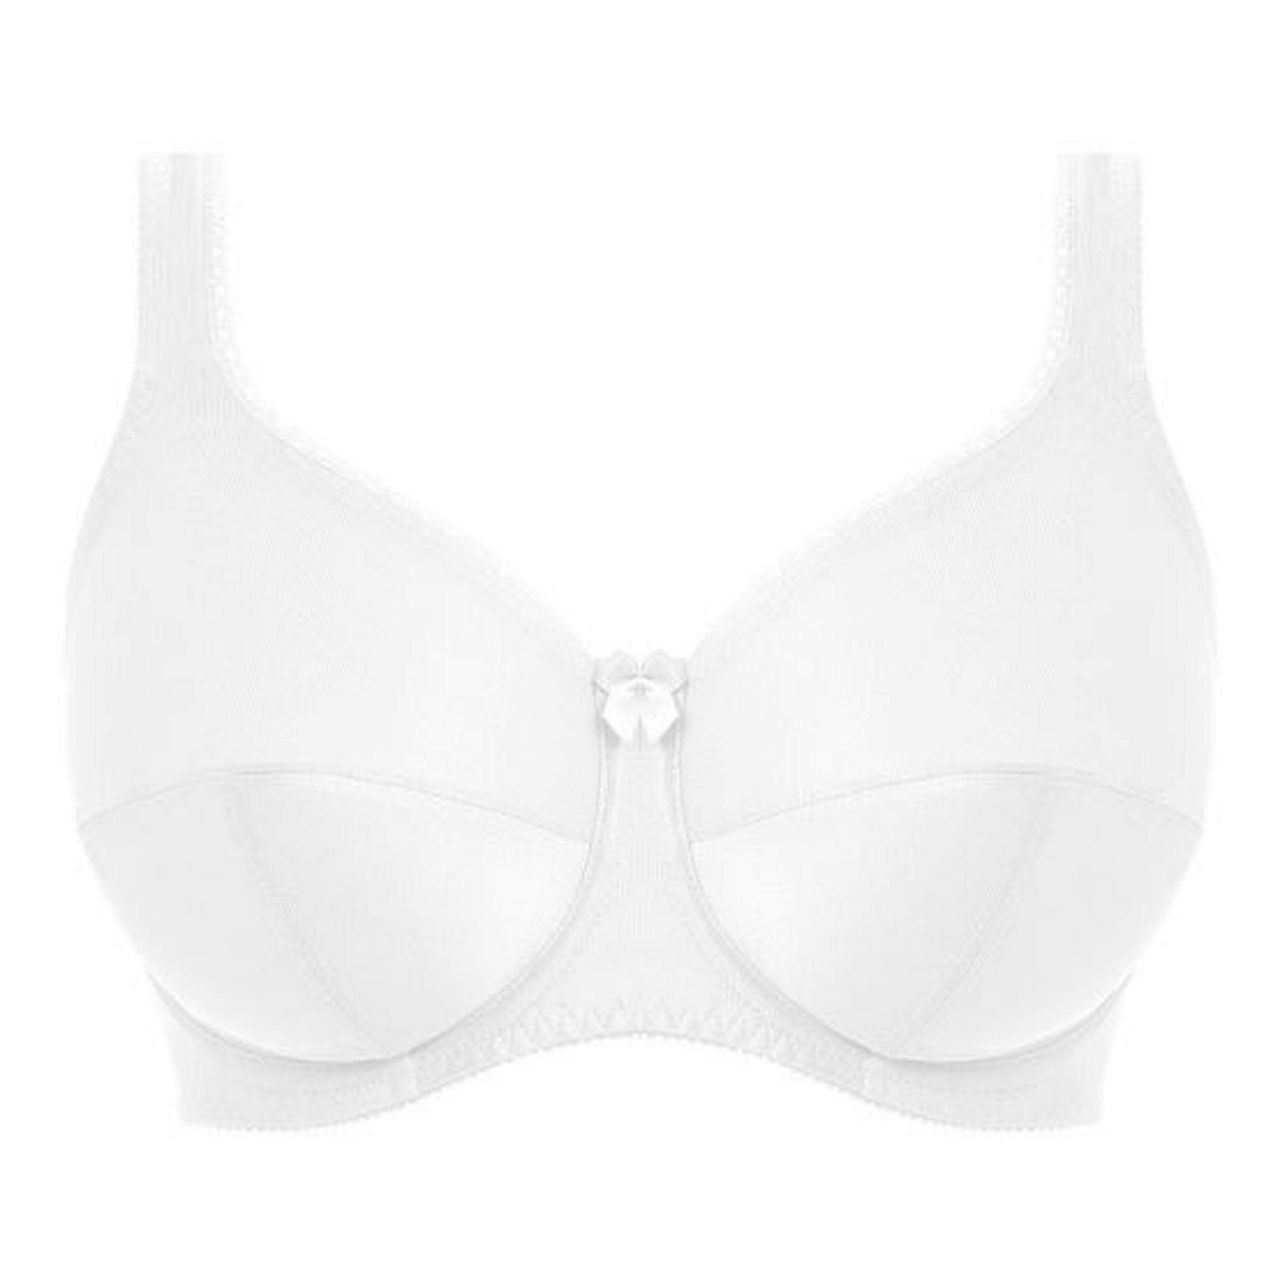 FANTASIE Speciality Smooth Full Cup Bra White